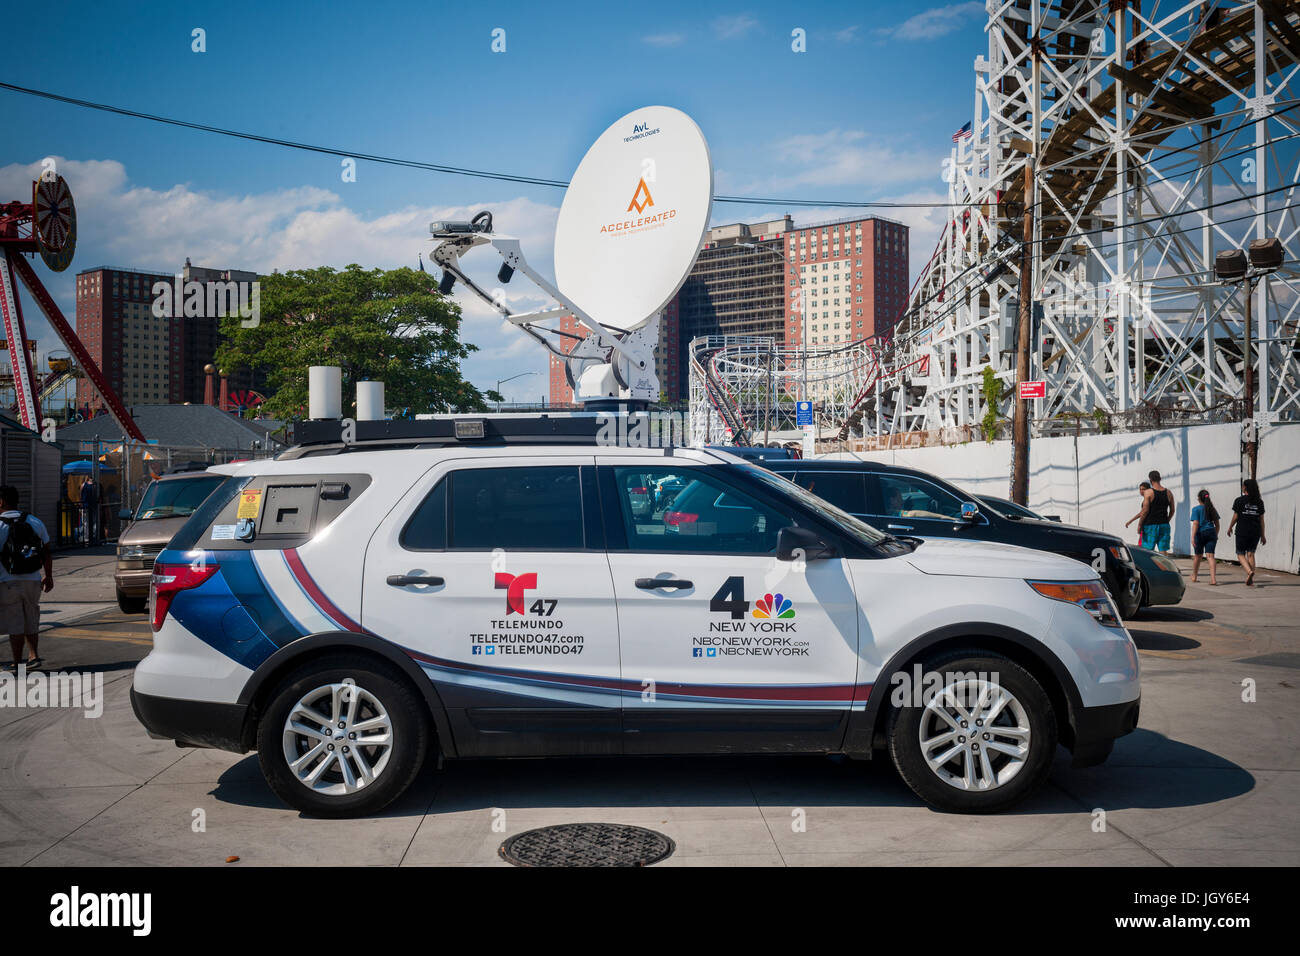 A Telemundo Spanish language television station mobile unit covering Coney Island in Brooklyn in New York on Independence Day, Tuesday, July 4, 2017. Telemundo is owned by NBC Universal. (© Richard B. Levine) Stock Photo